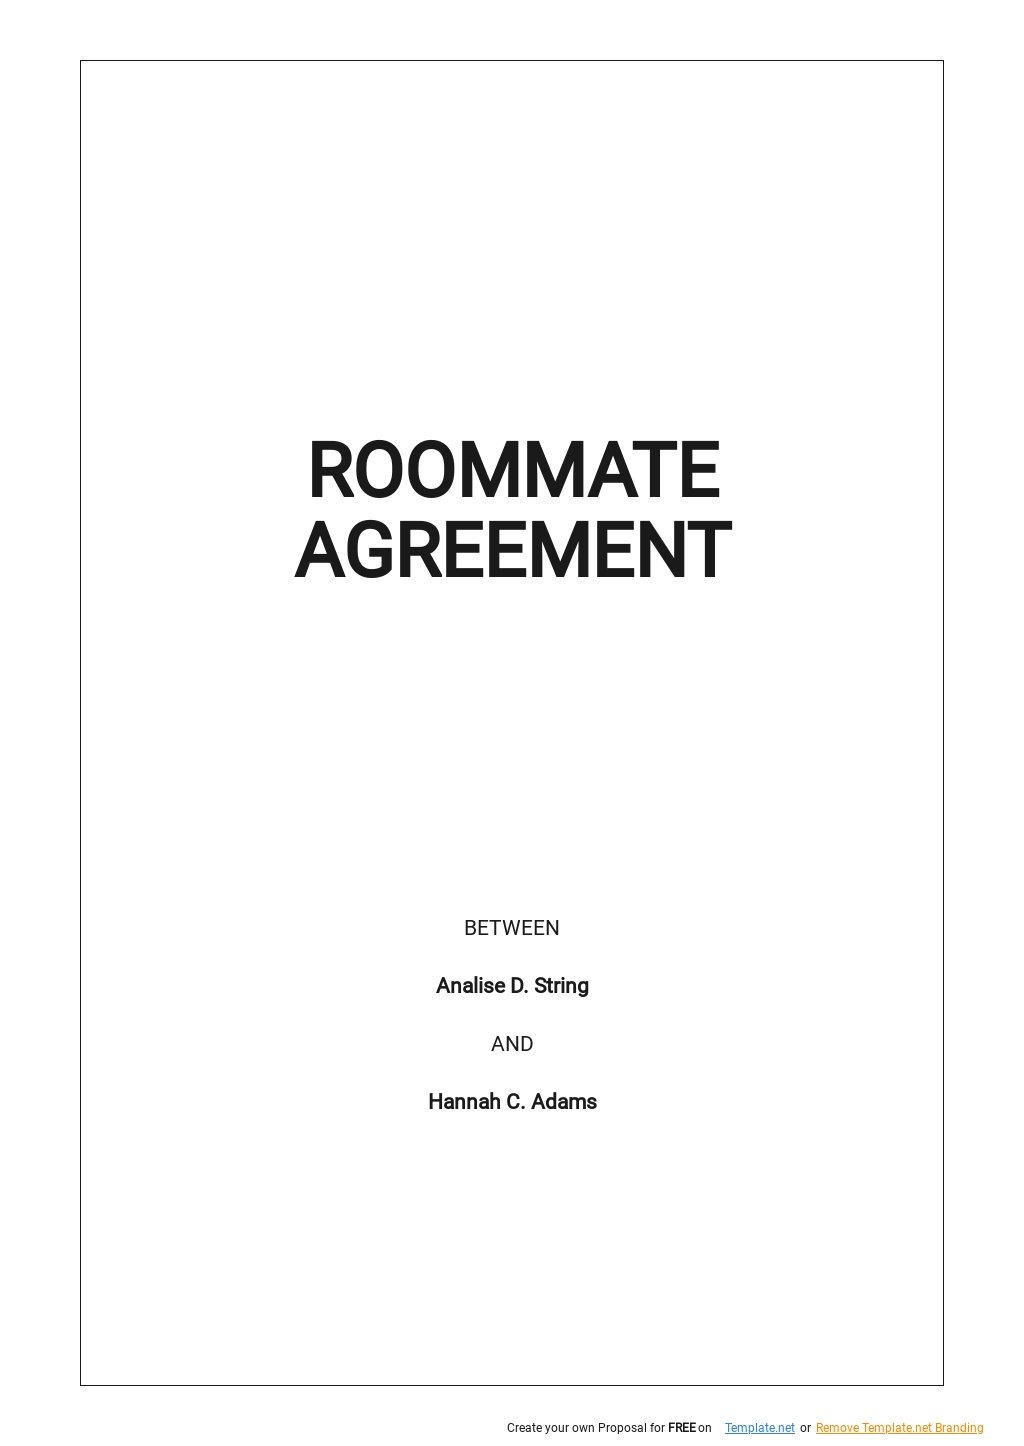 Free Roommate Agreement Google Docs Templates, 11+ Download